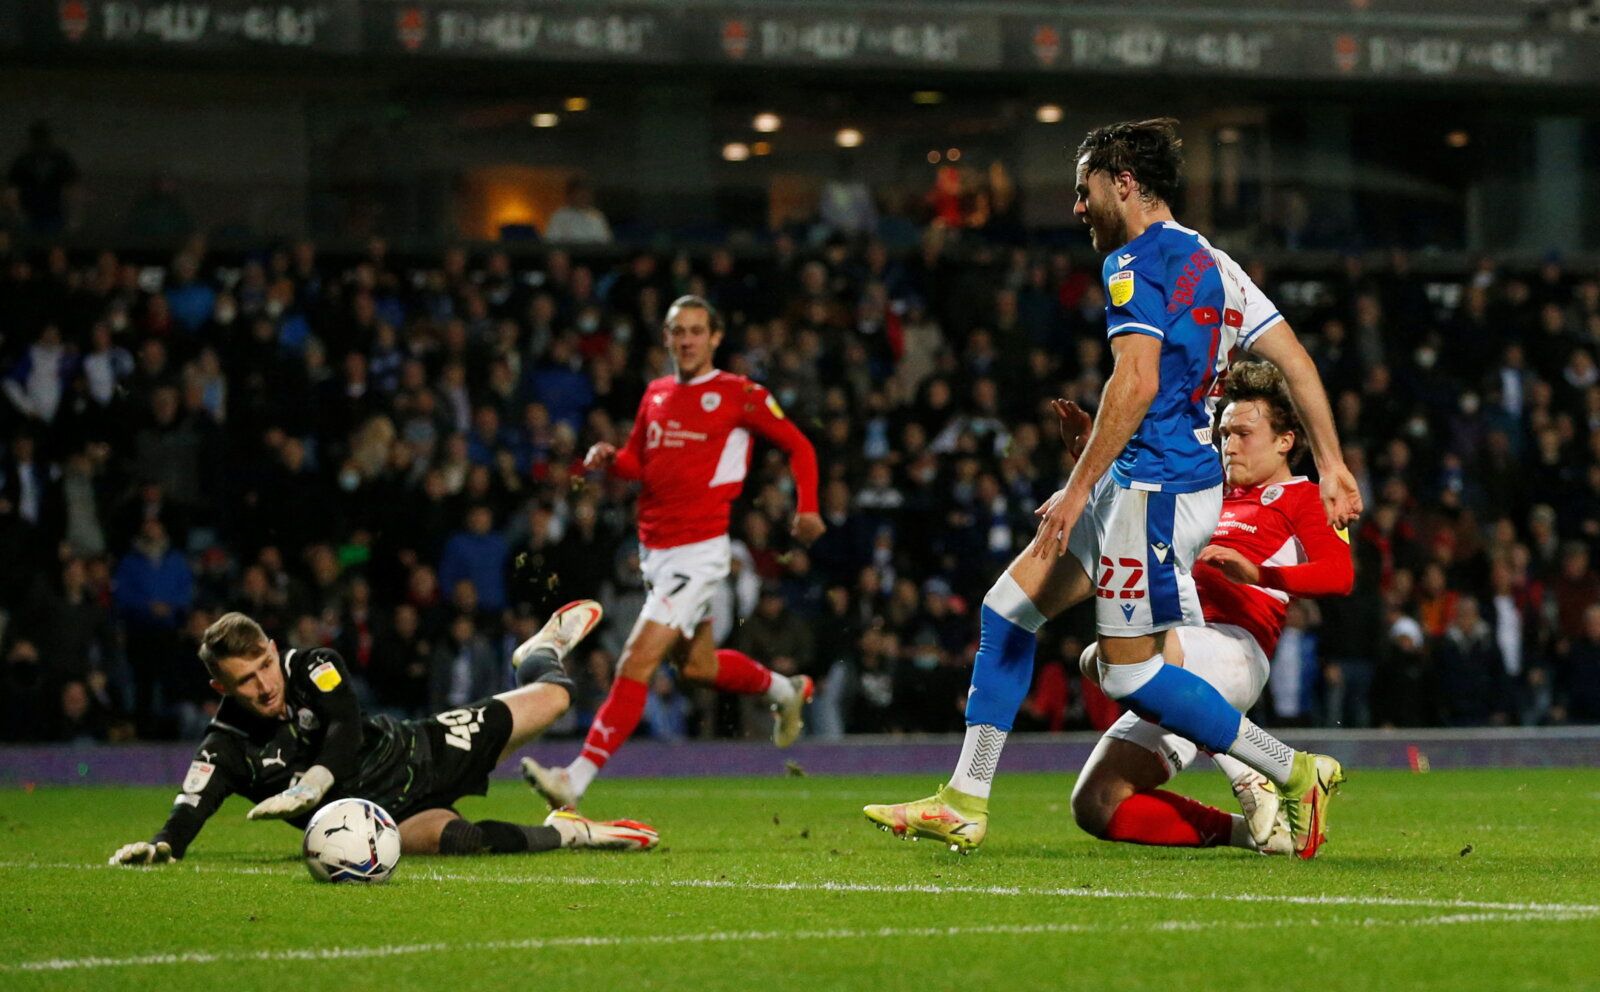 Soccer Football - Championship - Blackburn Rovers v Barnsley - Ewood Park, Blackburn, Britain - December 29, 2021 Blackburn Rovers' Ben Brereton Diaz shoots at goal   Action Images/Ed Sykes  EDITORIAL USE ONLY. No use with unauthorized audio, video, data, fixture lists, club/league logos or 